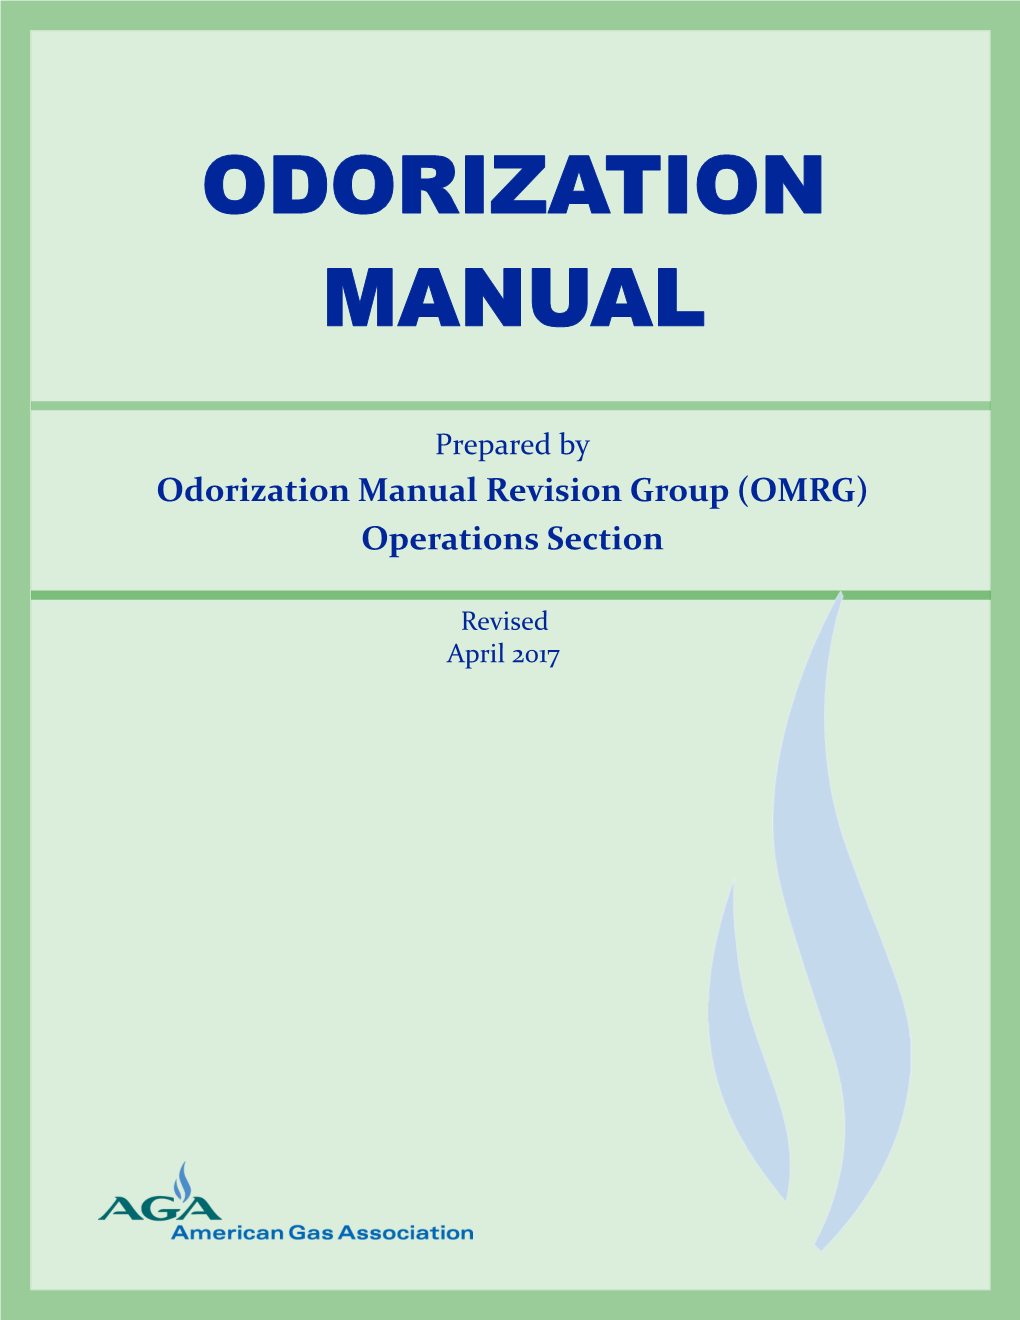 Odorization Manual Revision Group (OMRG) Operations Section